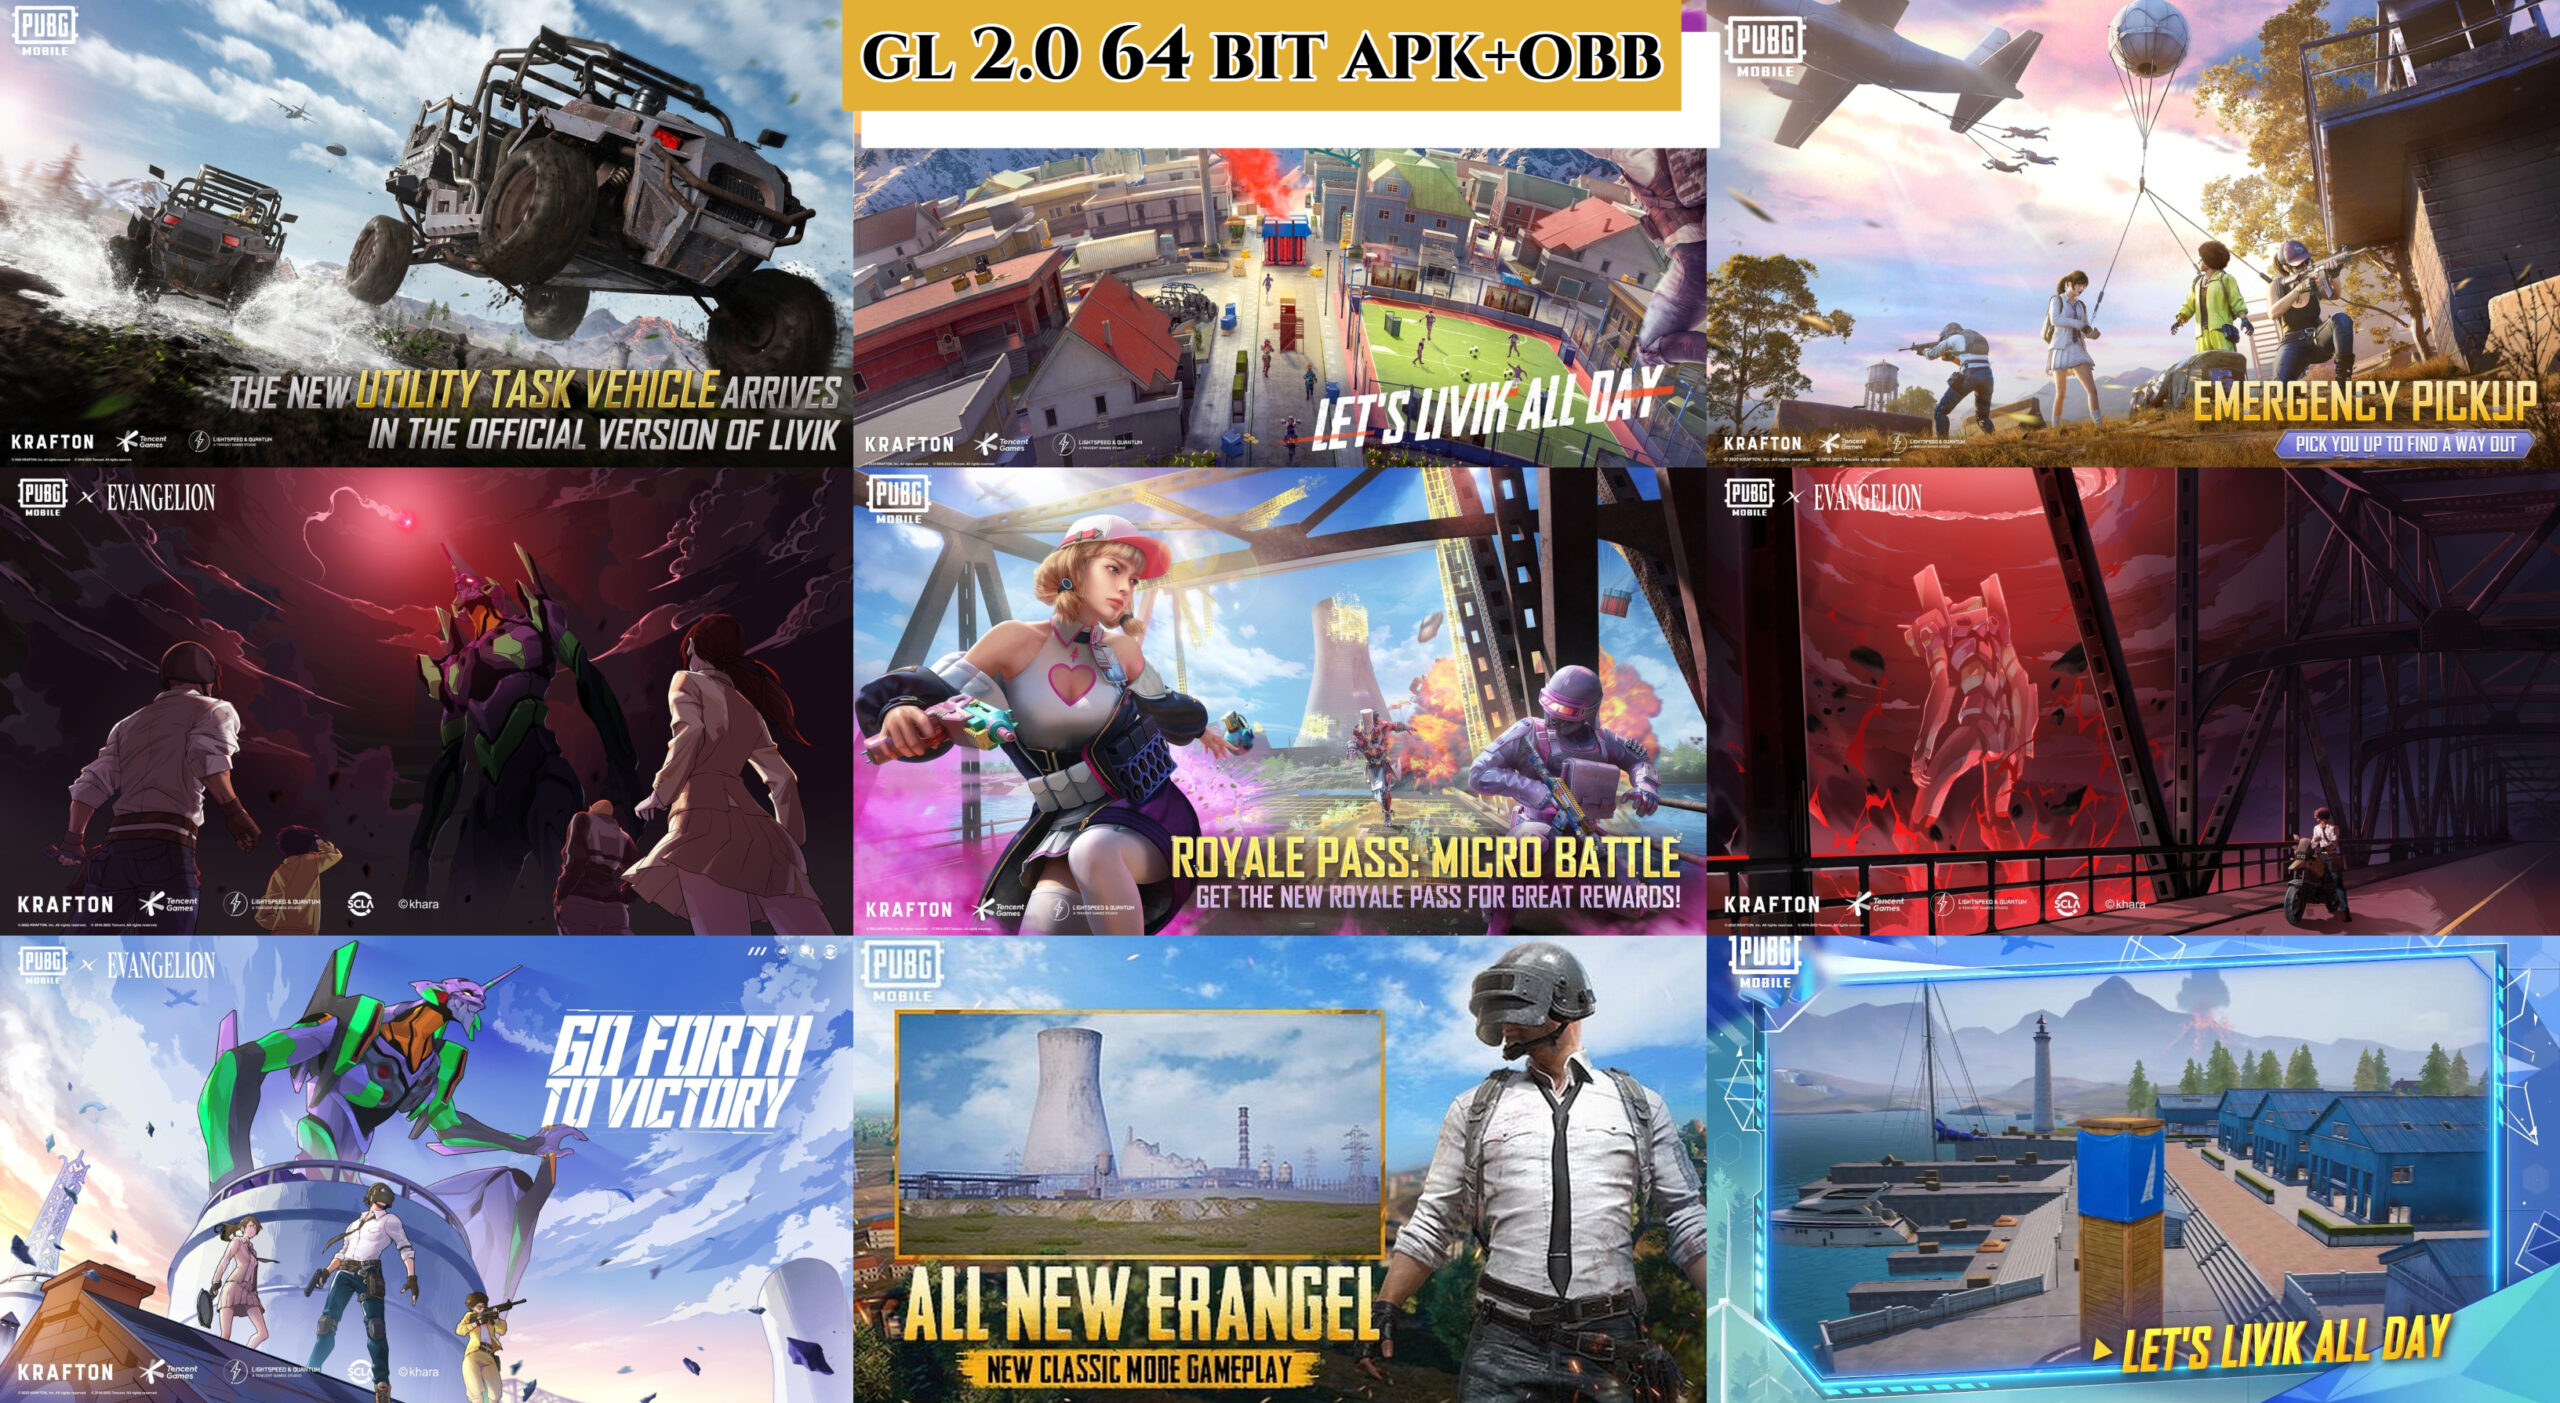 You are currently viewing PUBG Mobile Global 2.0 Update APK 64 BIT + OBB Download